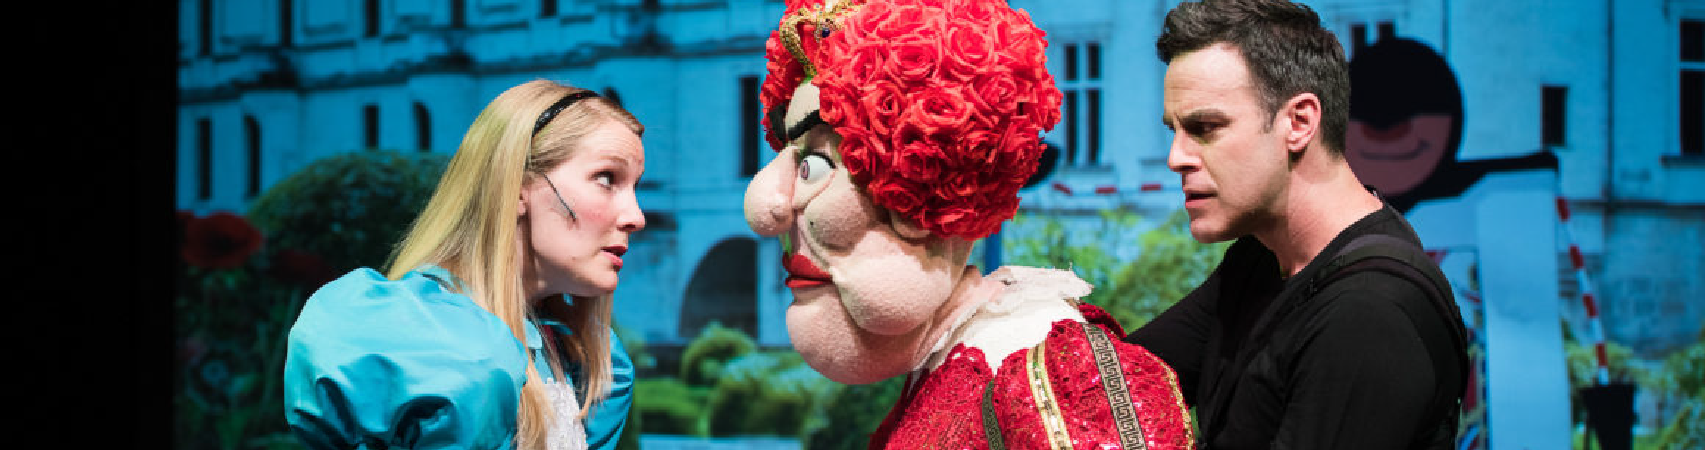 DLUX puppets depicting two actors and a puppet portraying Alice in Wonderland